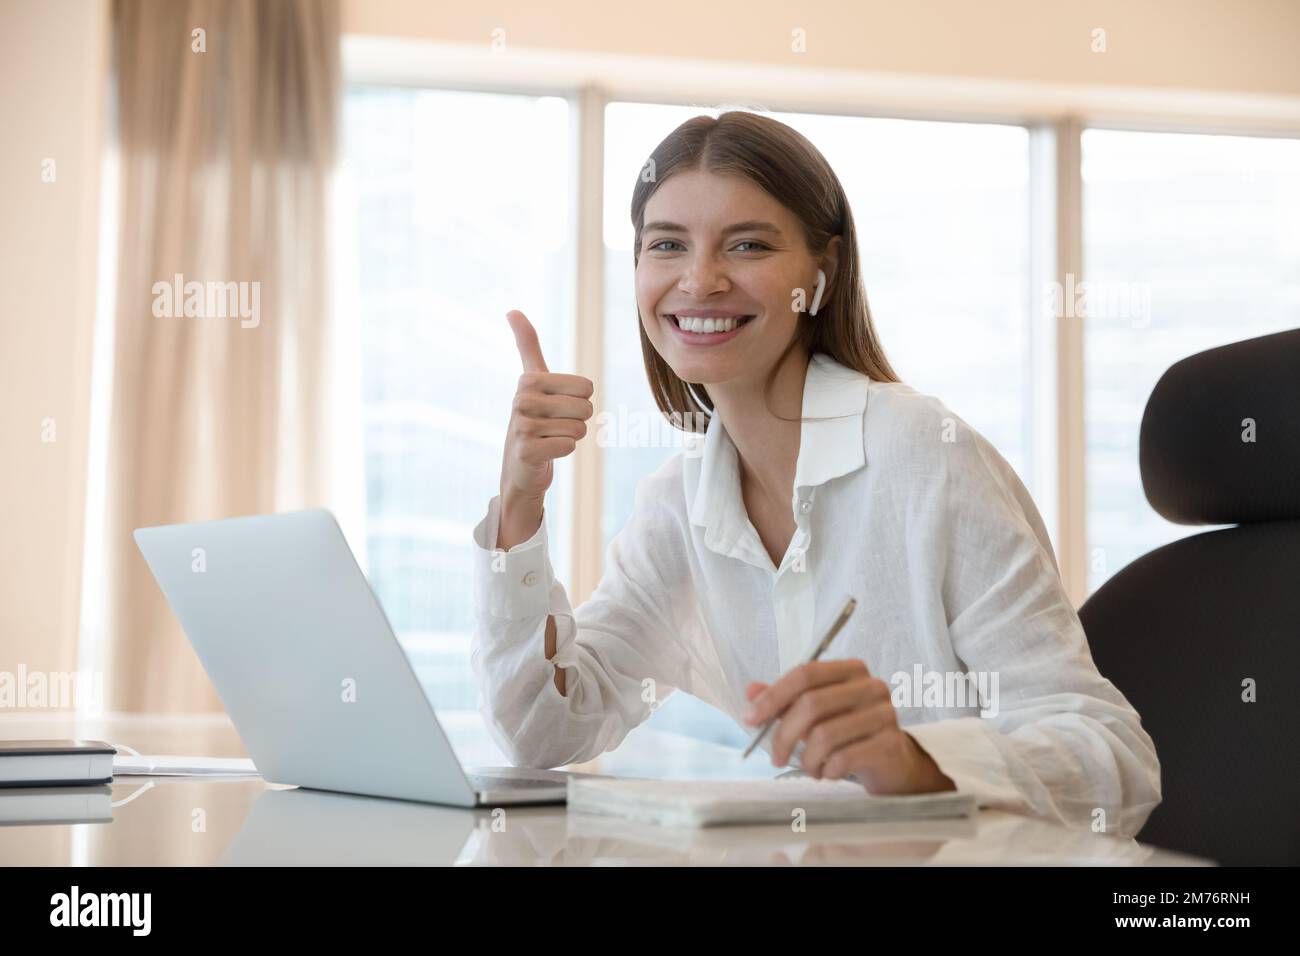 Woman student e-learns online smile showing thumbs up gesture Stock Photo